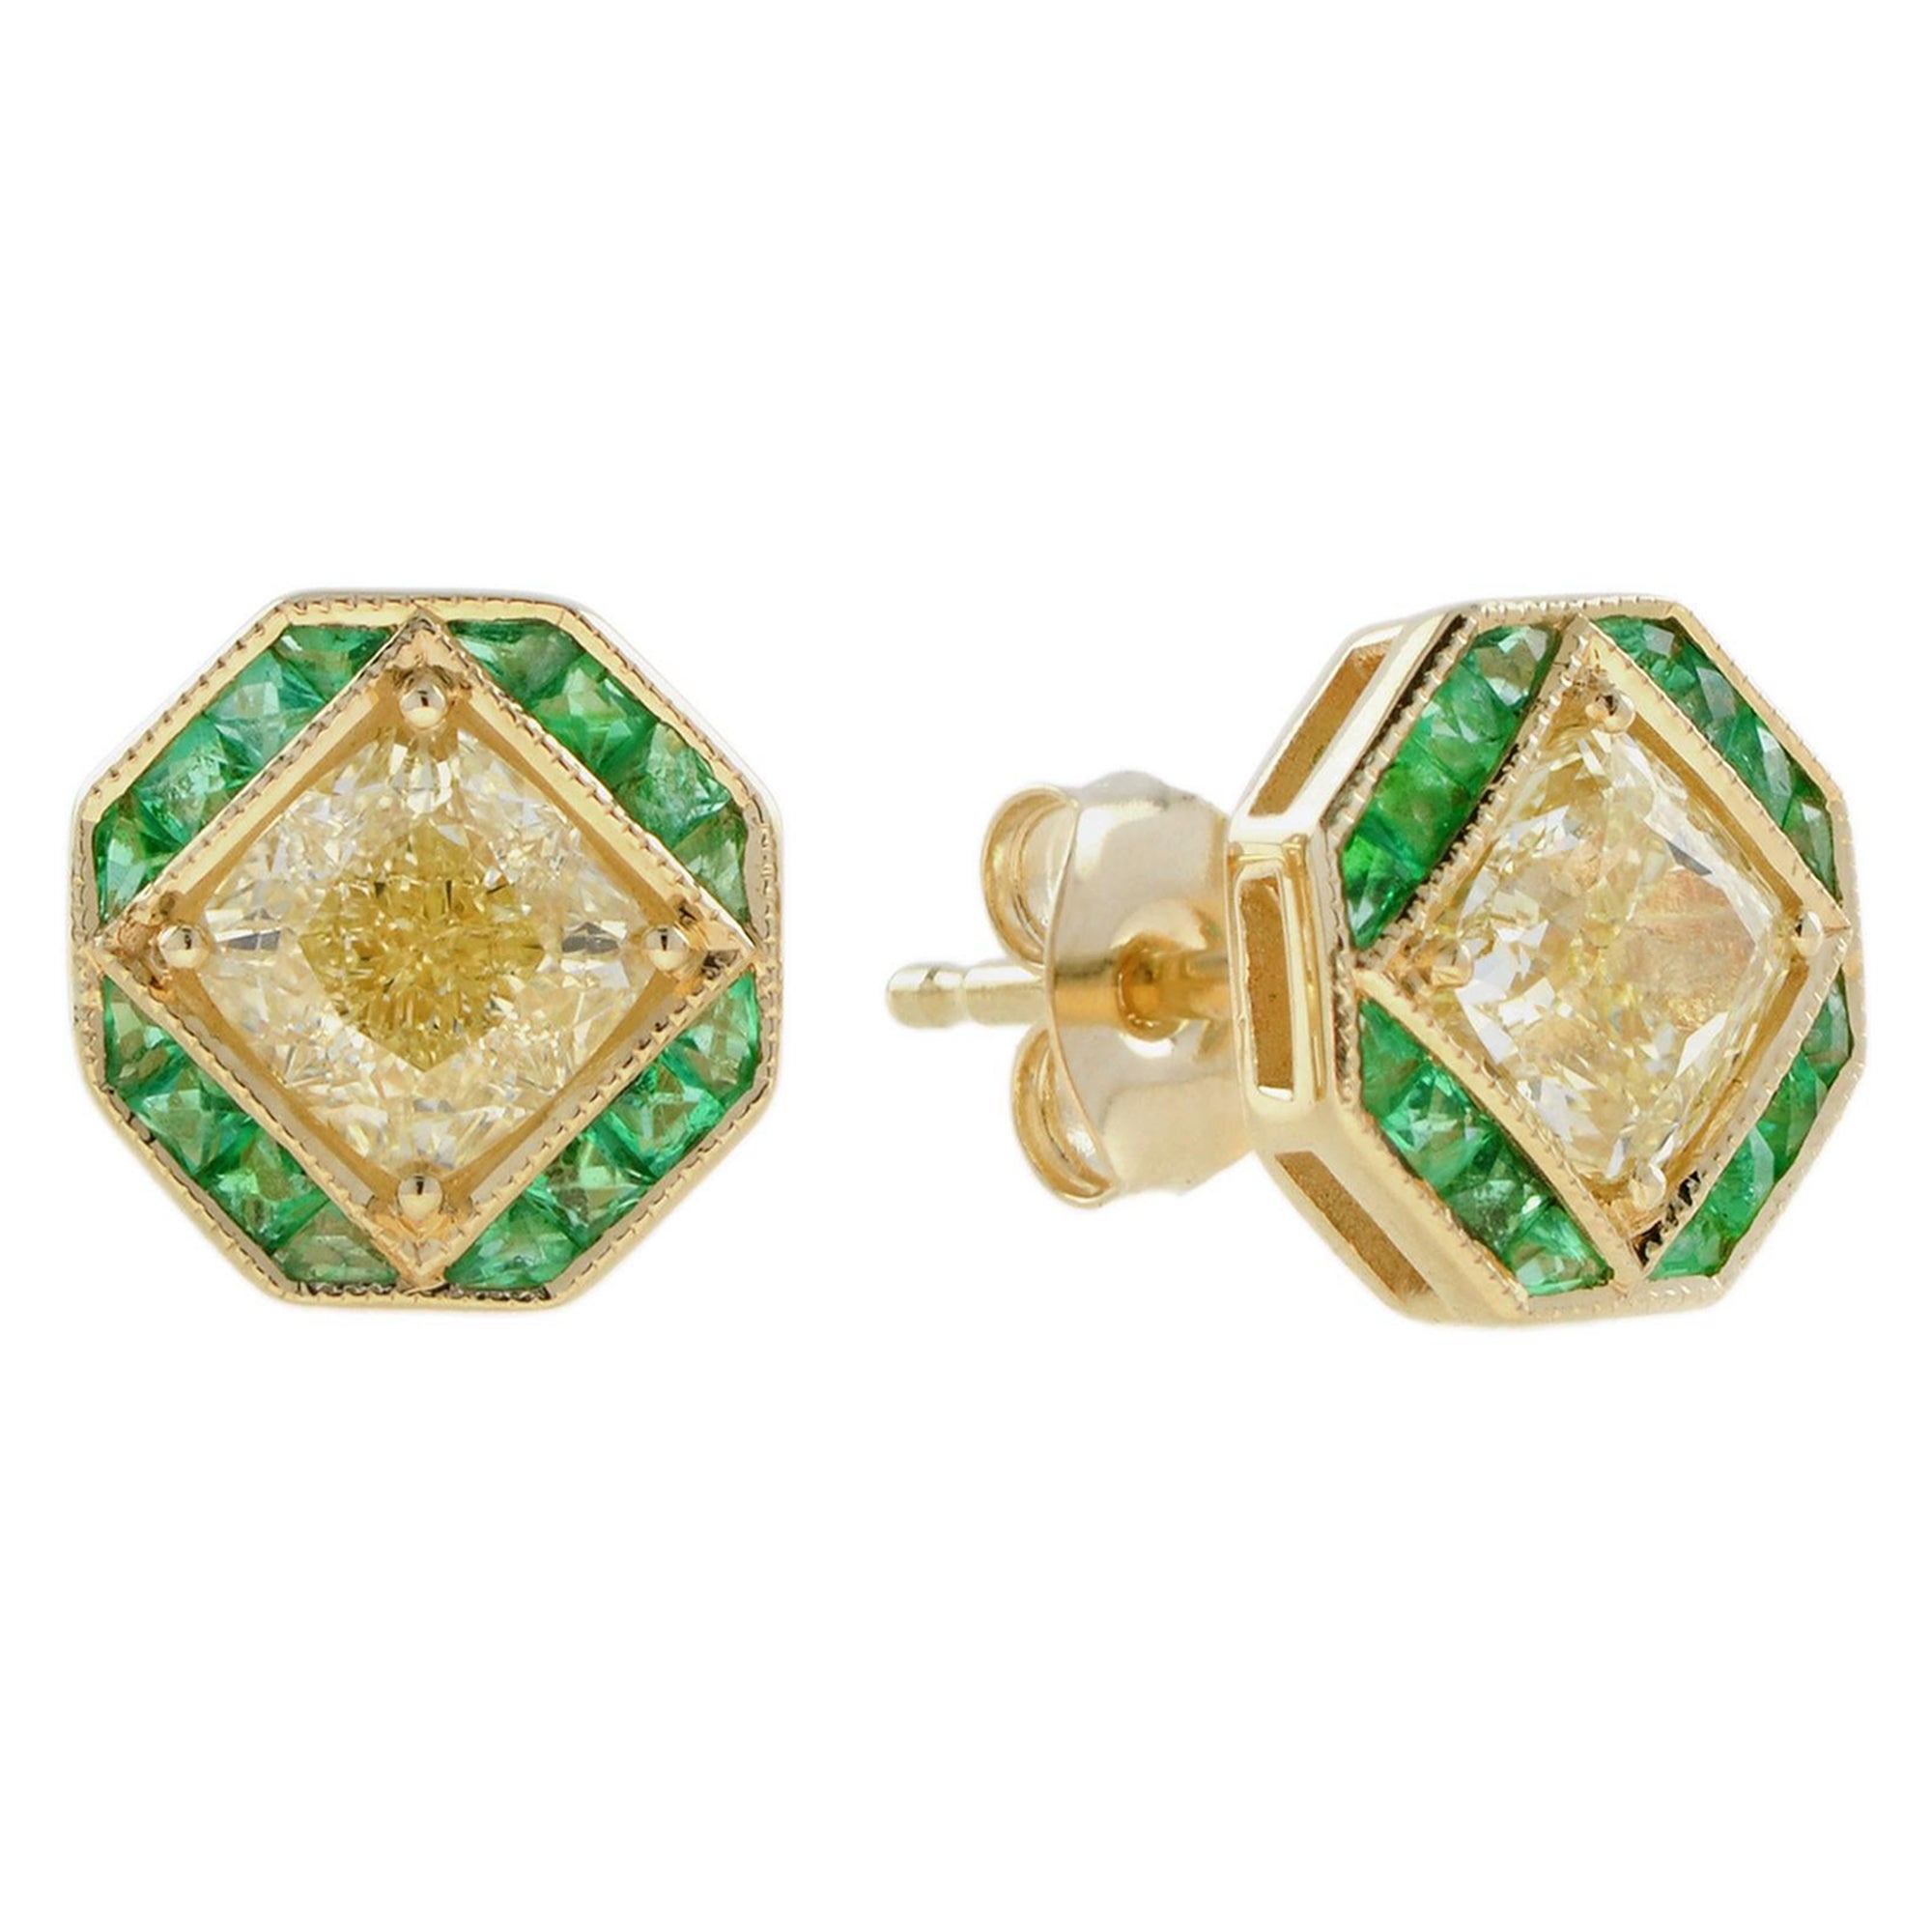 GIA Diamond and Emerald Art Deco Style Stud Earrings in 18k Yellow Gold For Sale